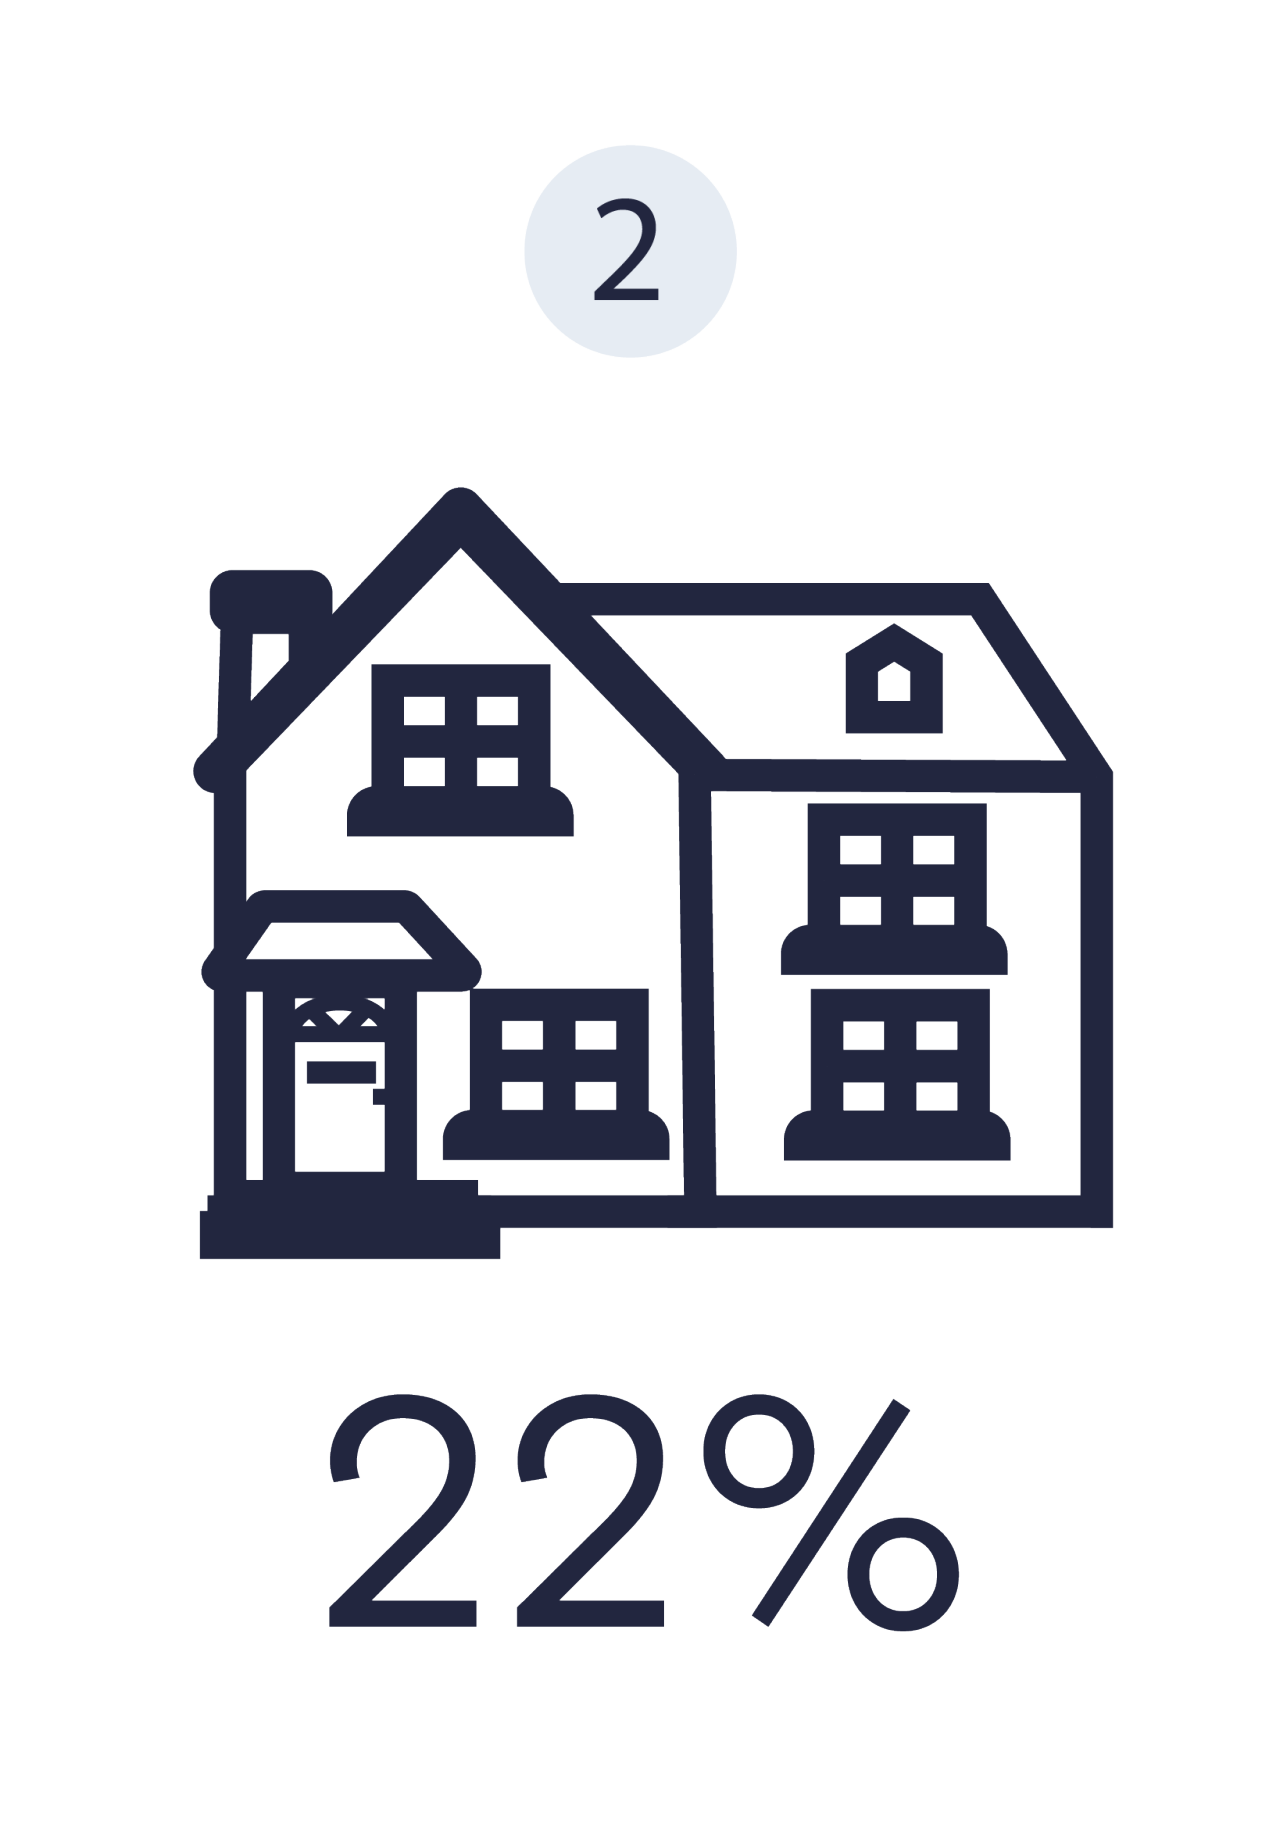 Image shows a dark blue number 2 in a light blue circle at the top. Underneath is a dark blue outline icon of a house.  Underneath the house is dark blue text which reads '25%' representing the number of people who save to pay off a mortgage.